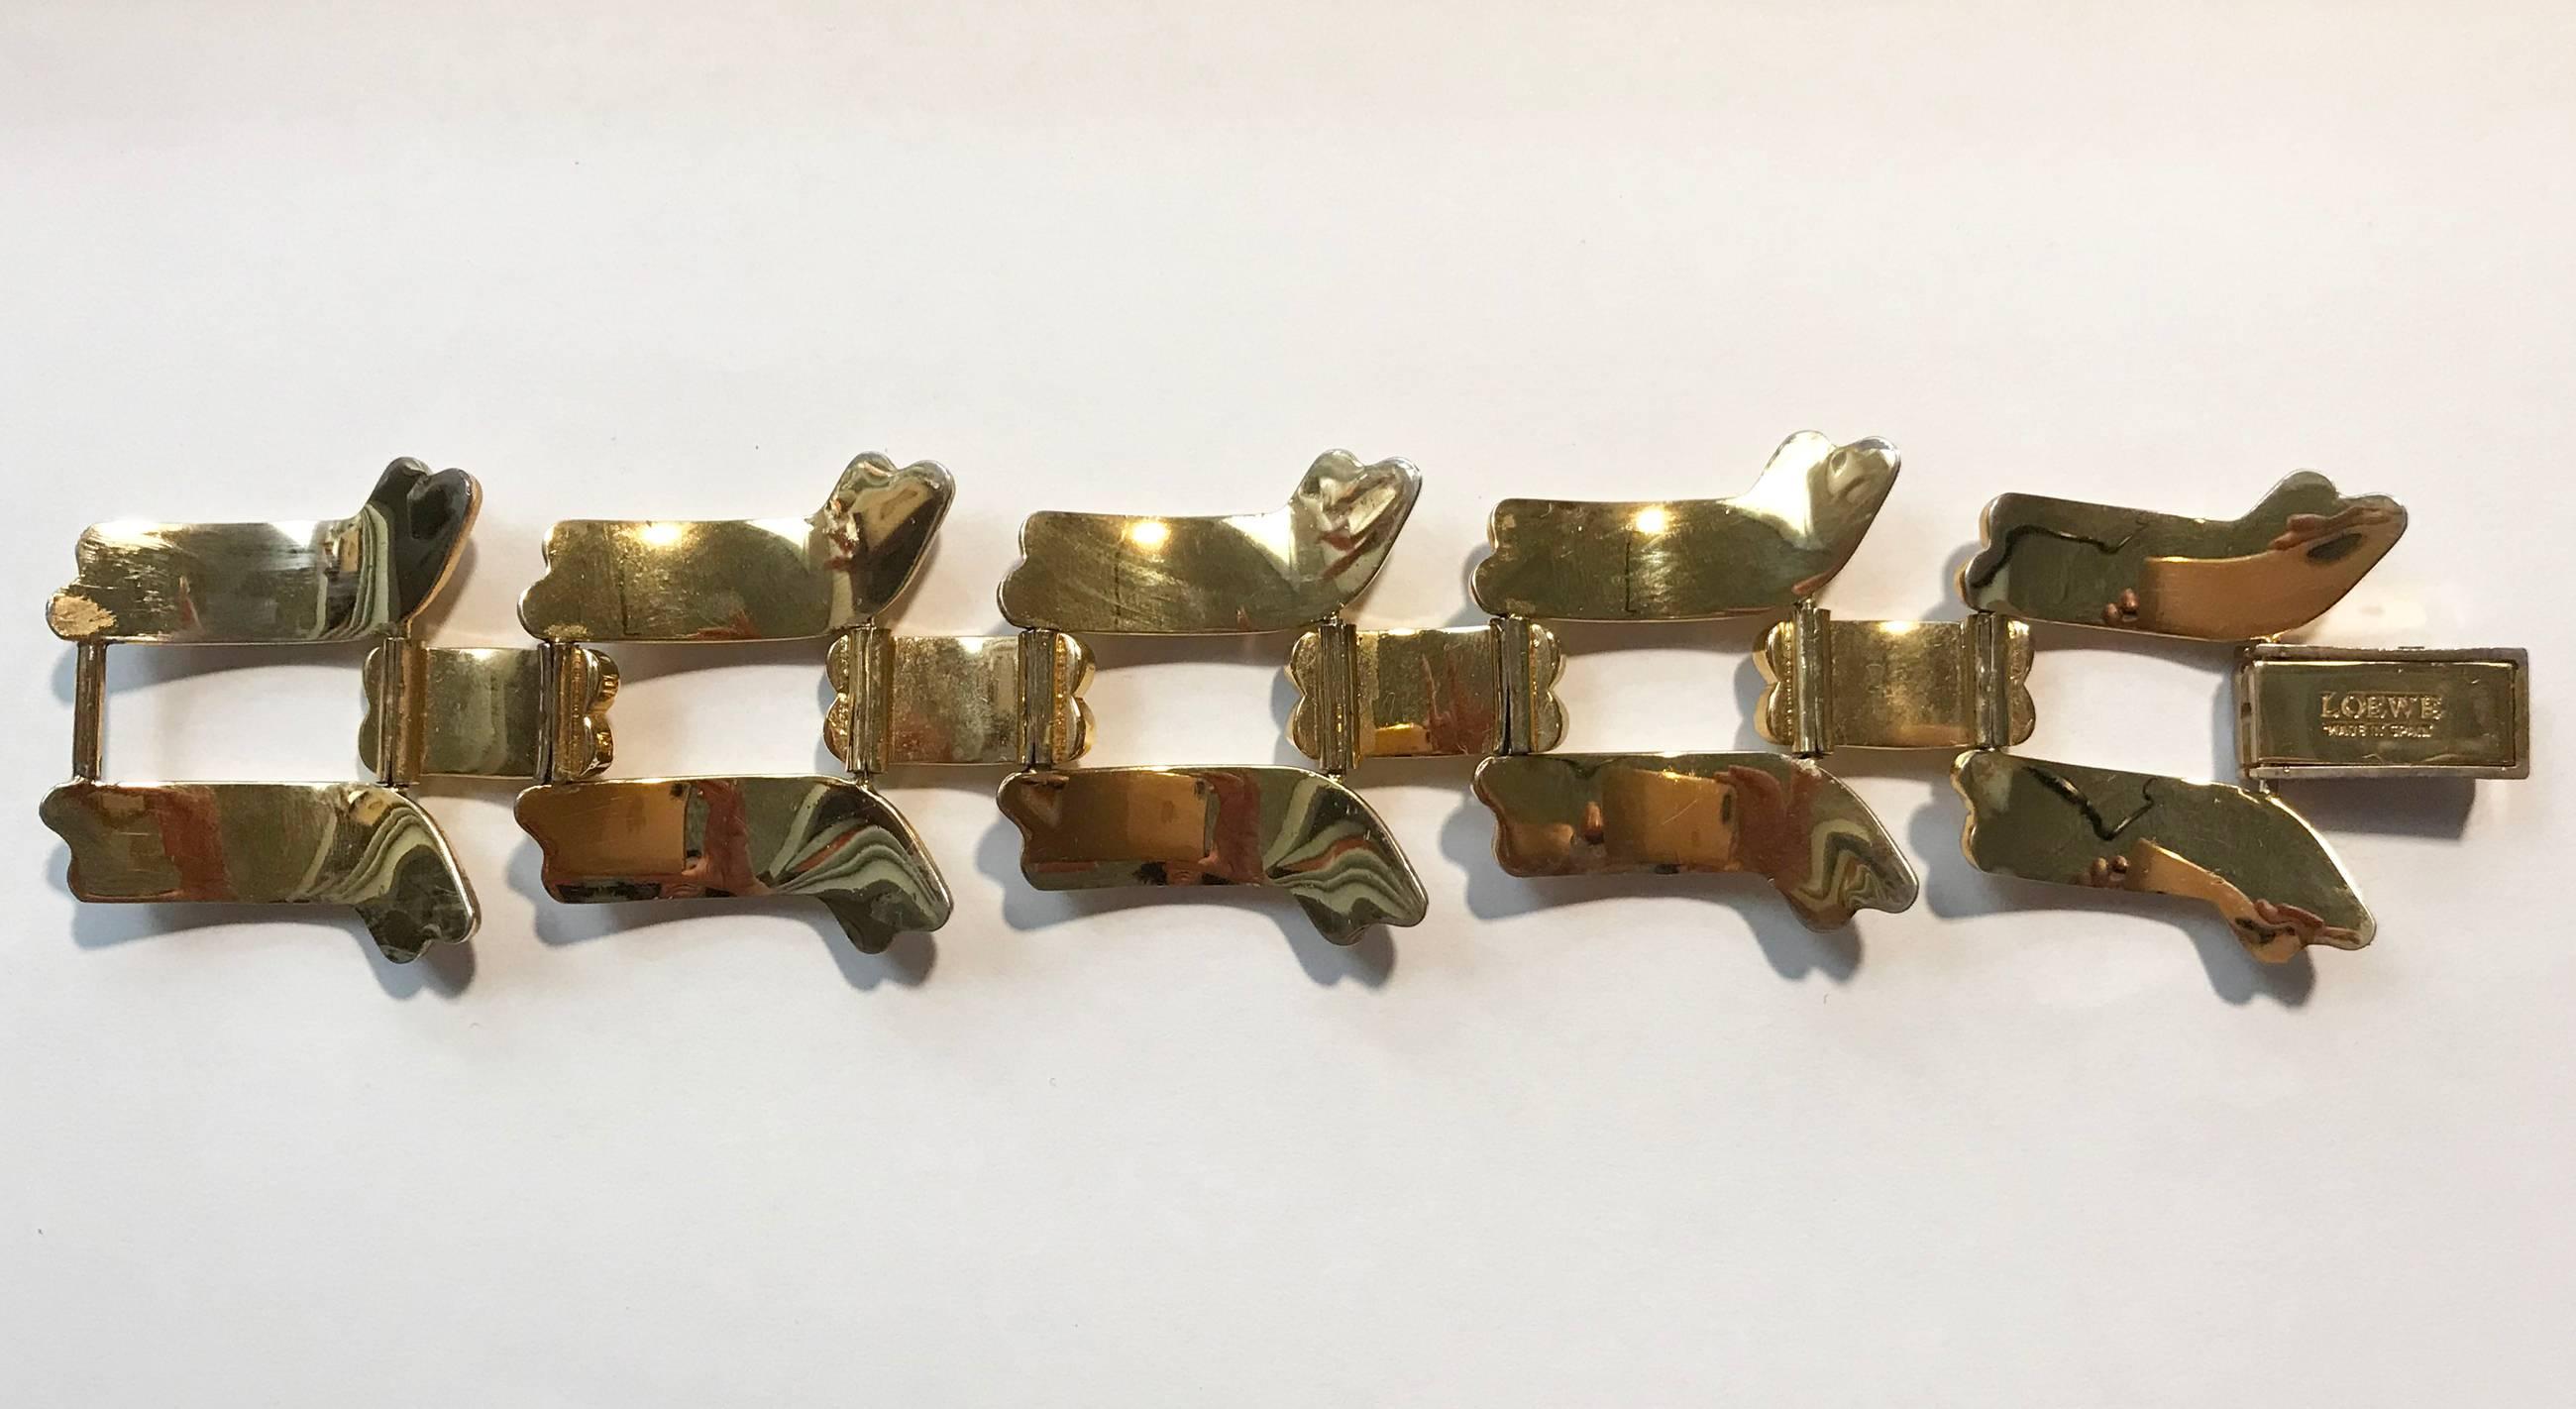 High quality gold colour metal bracelet by Loewe, 